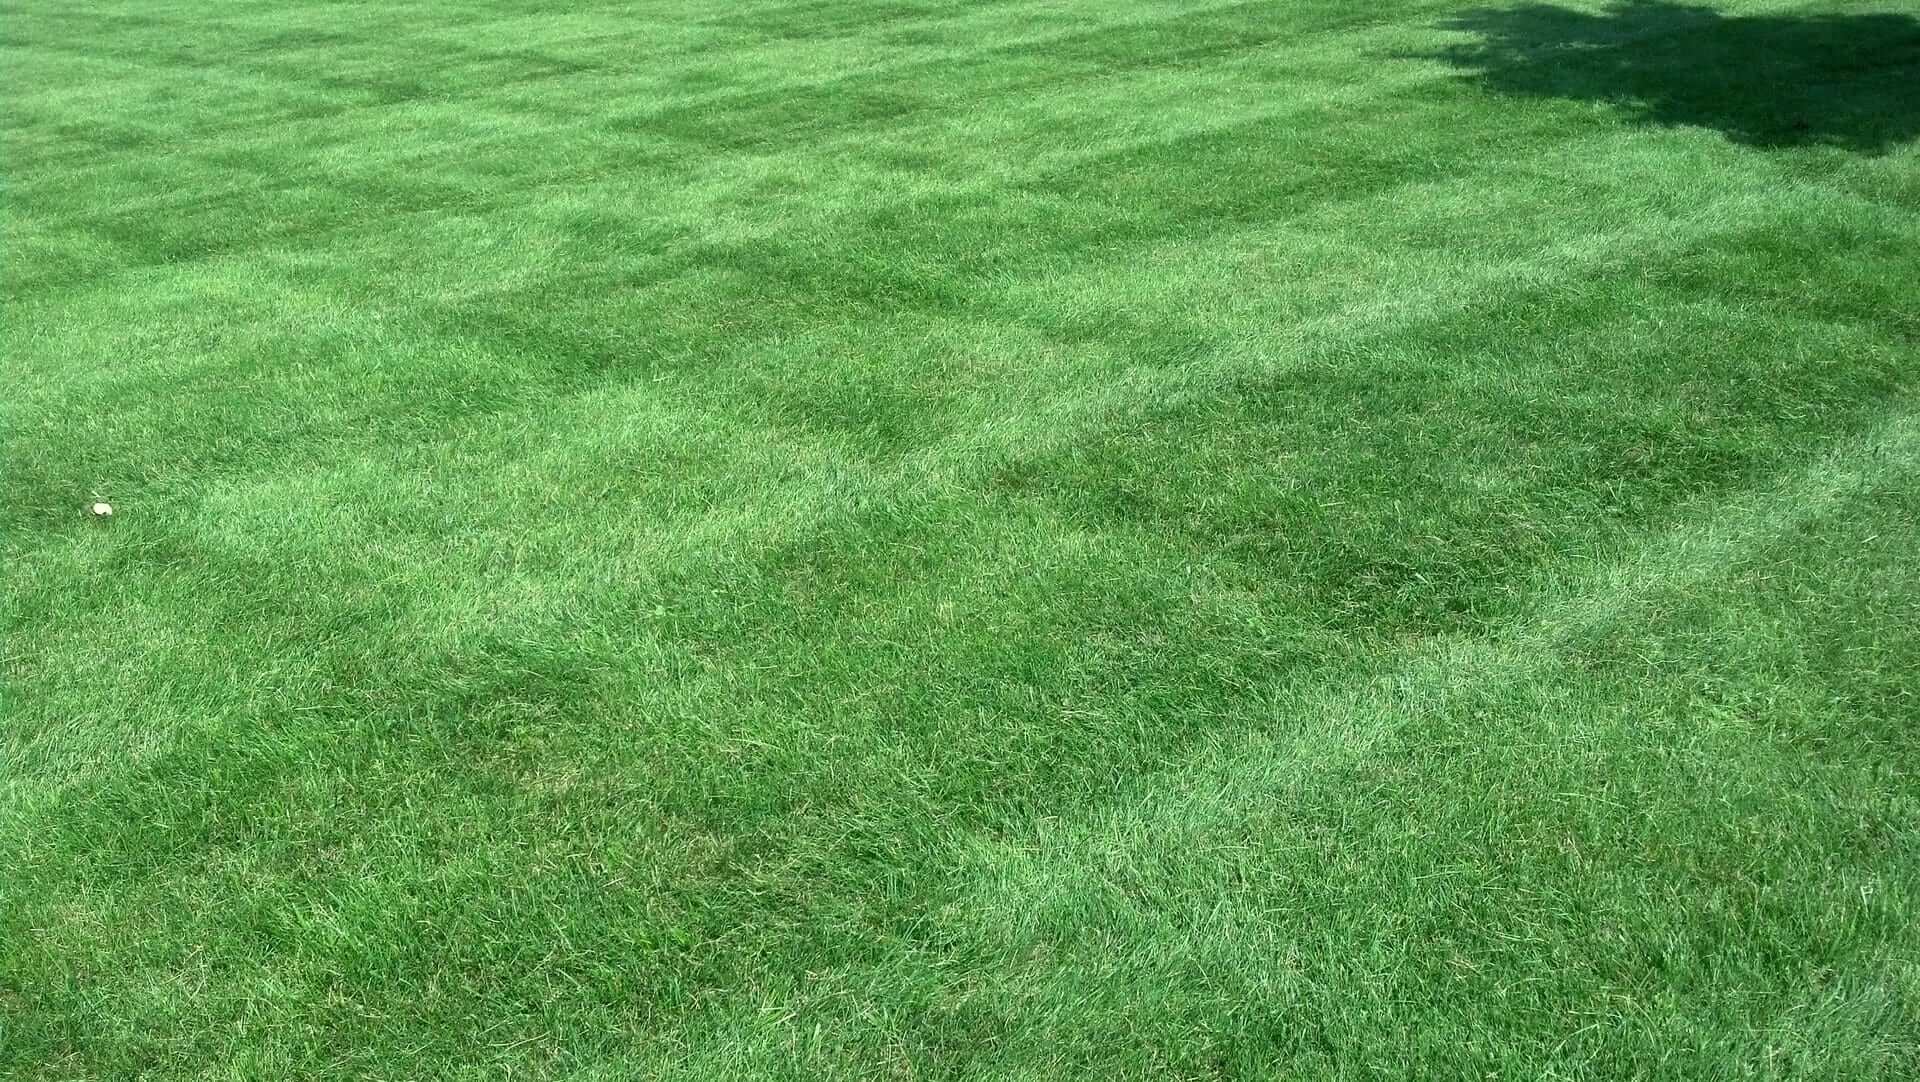 Fertilized lawn that is weed free